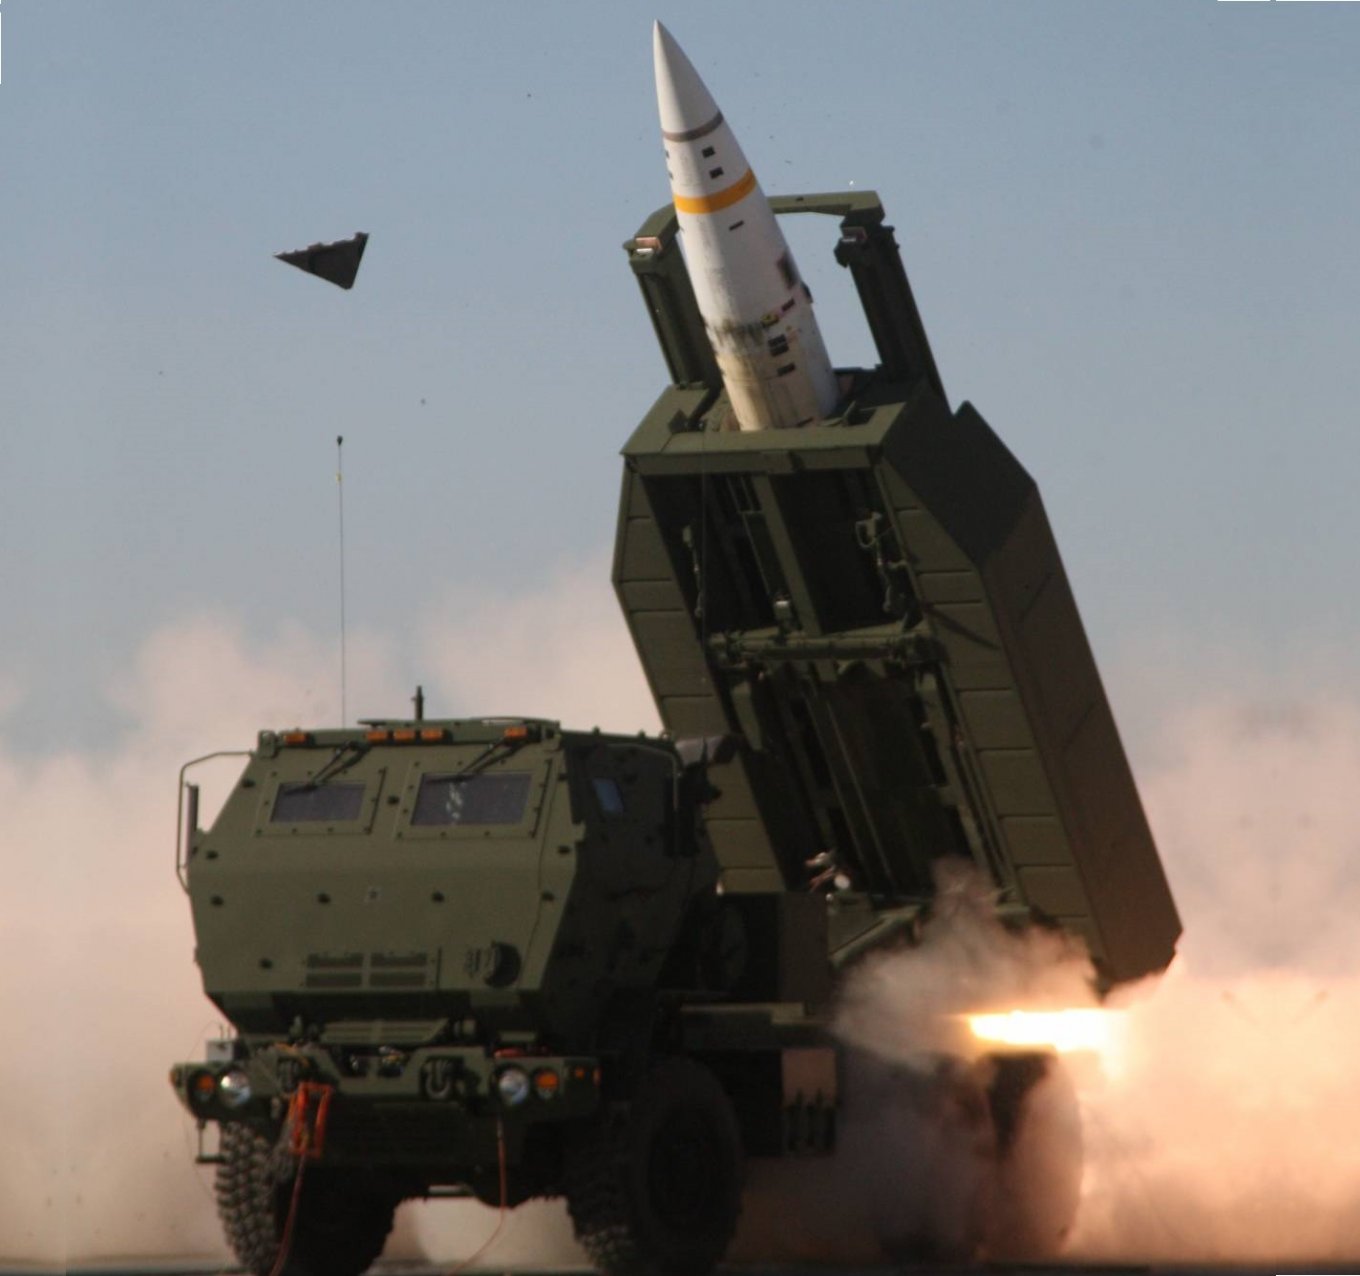 Defense Express / ATACMS - Army Tactical Missile System manufactured by the U.S. defense company Lockheed Martin.